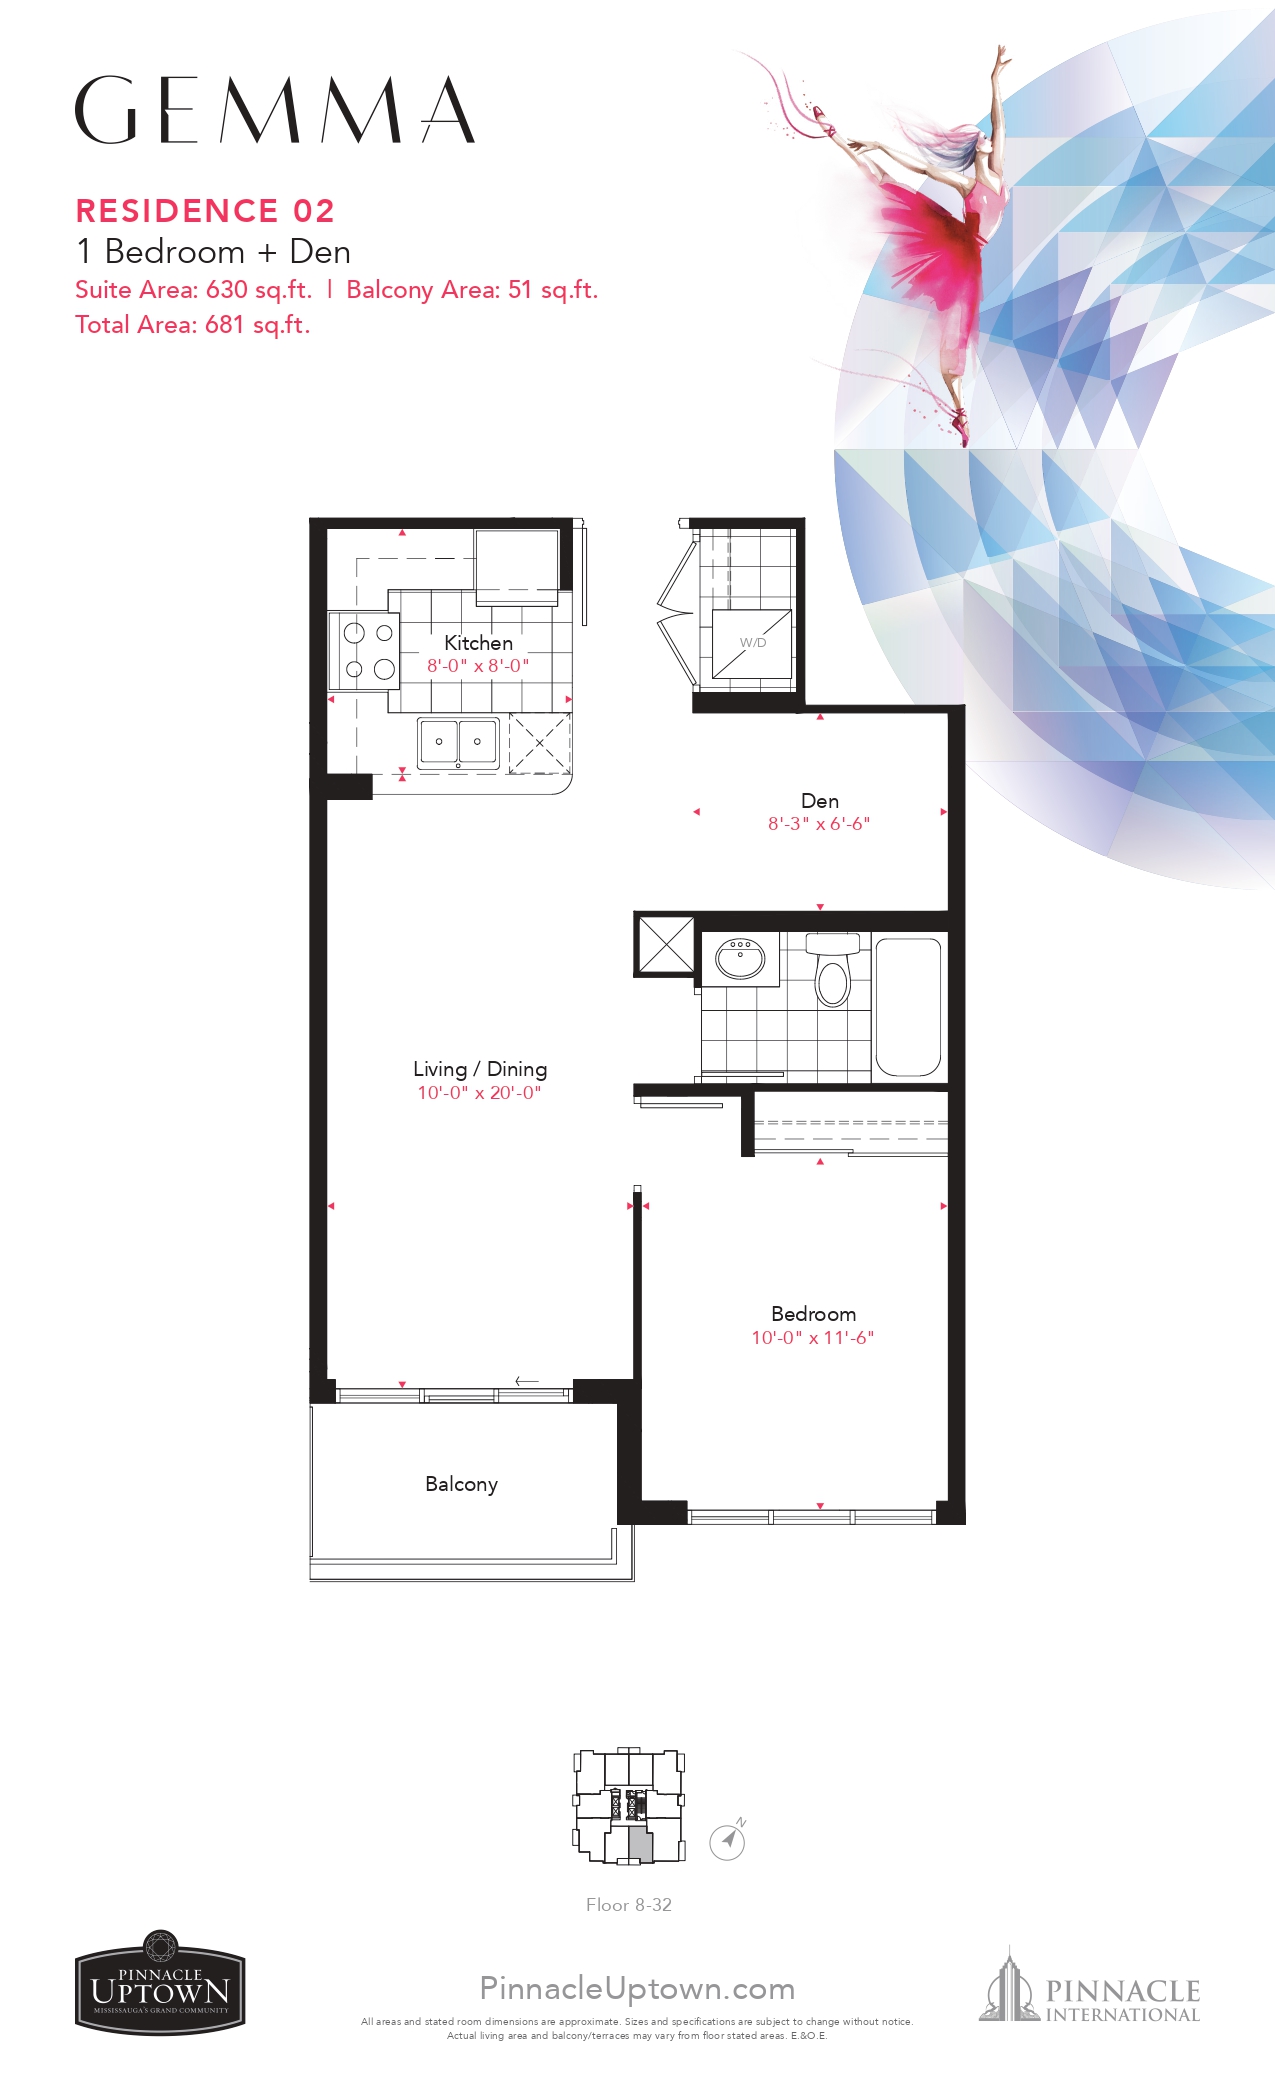  Floor Plan of Gemma Condos with undefined beds